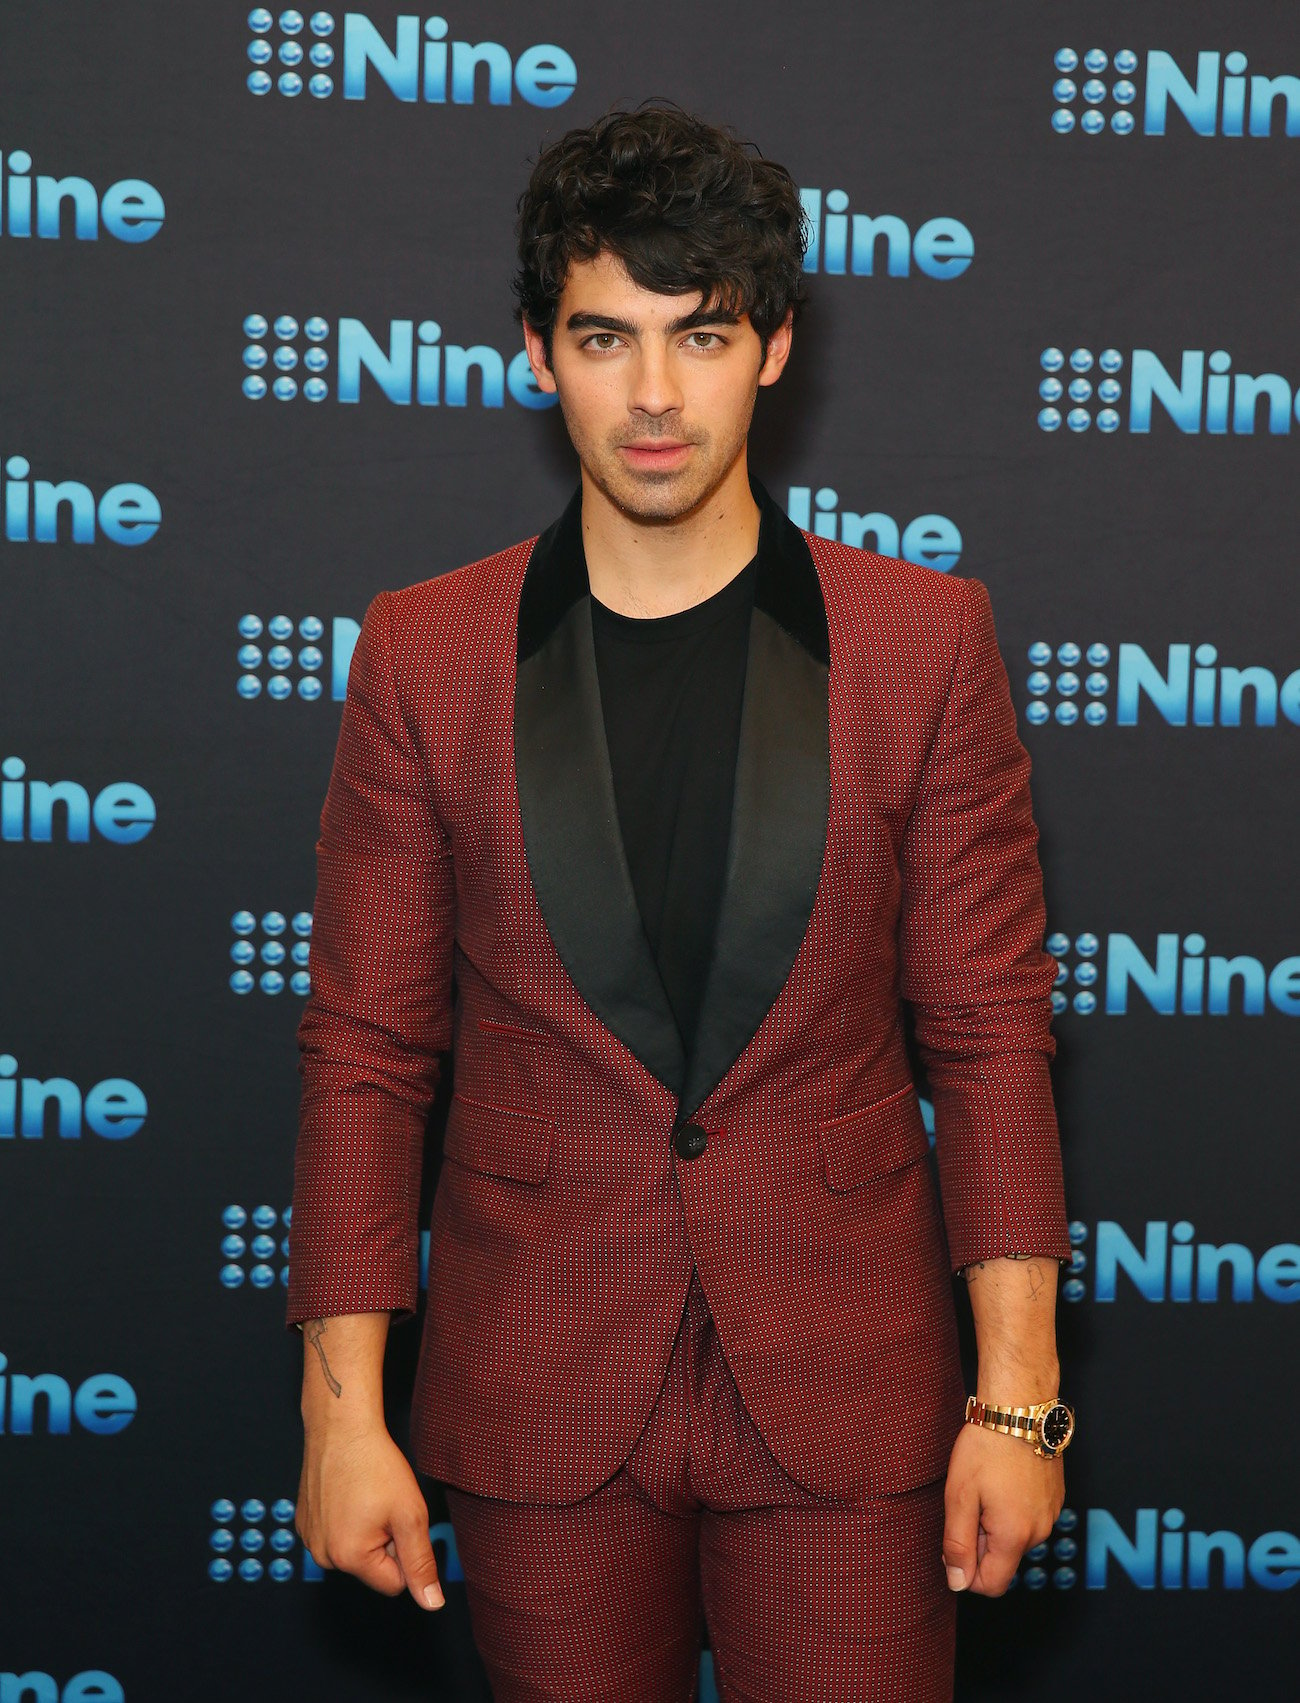 Joe Jonas attends the Nine All Stars Event in a red suit